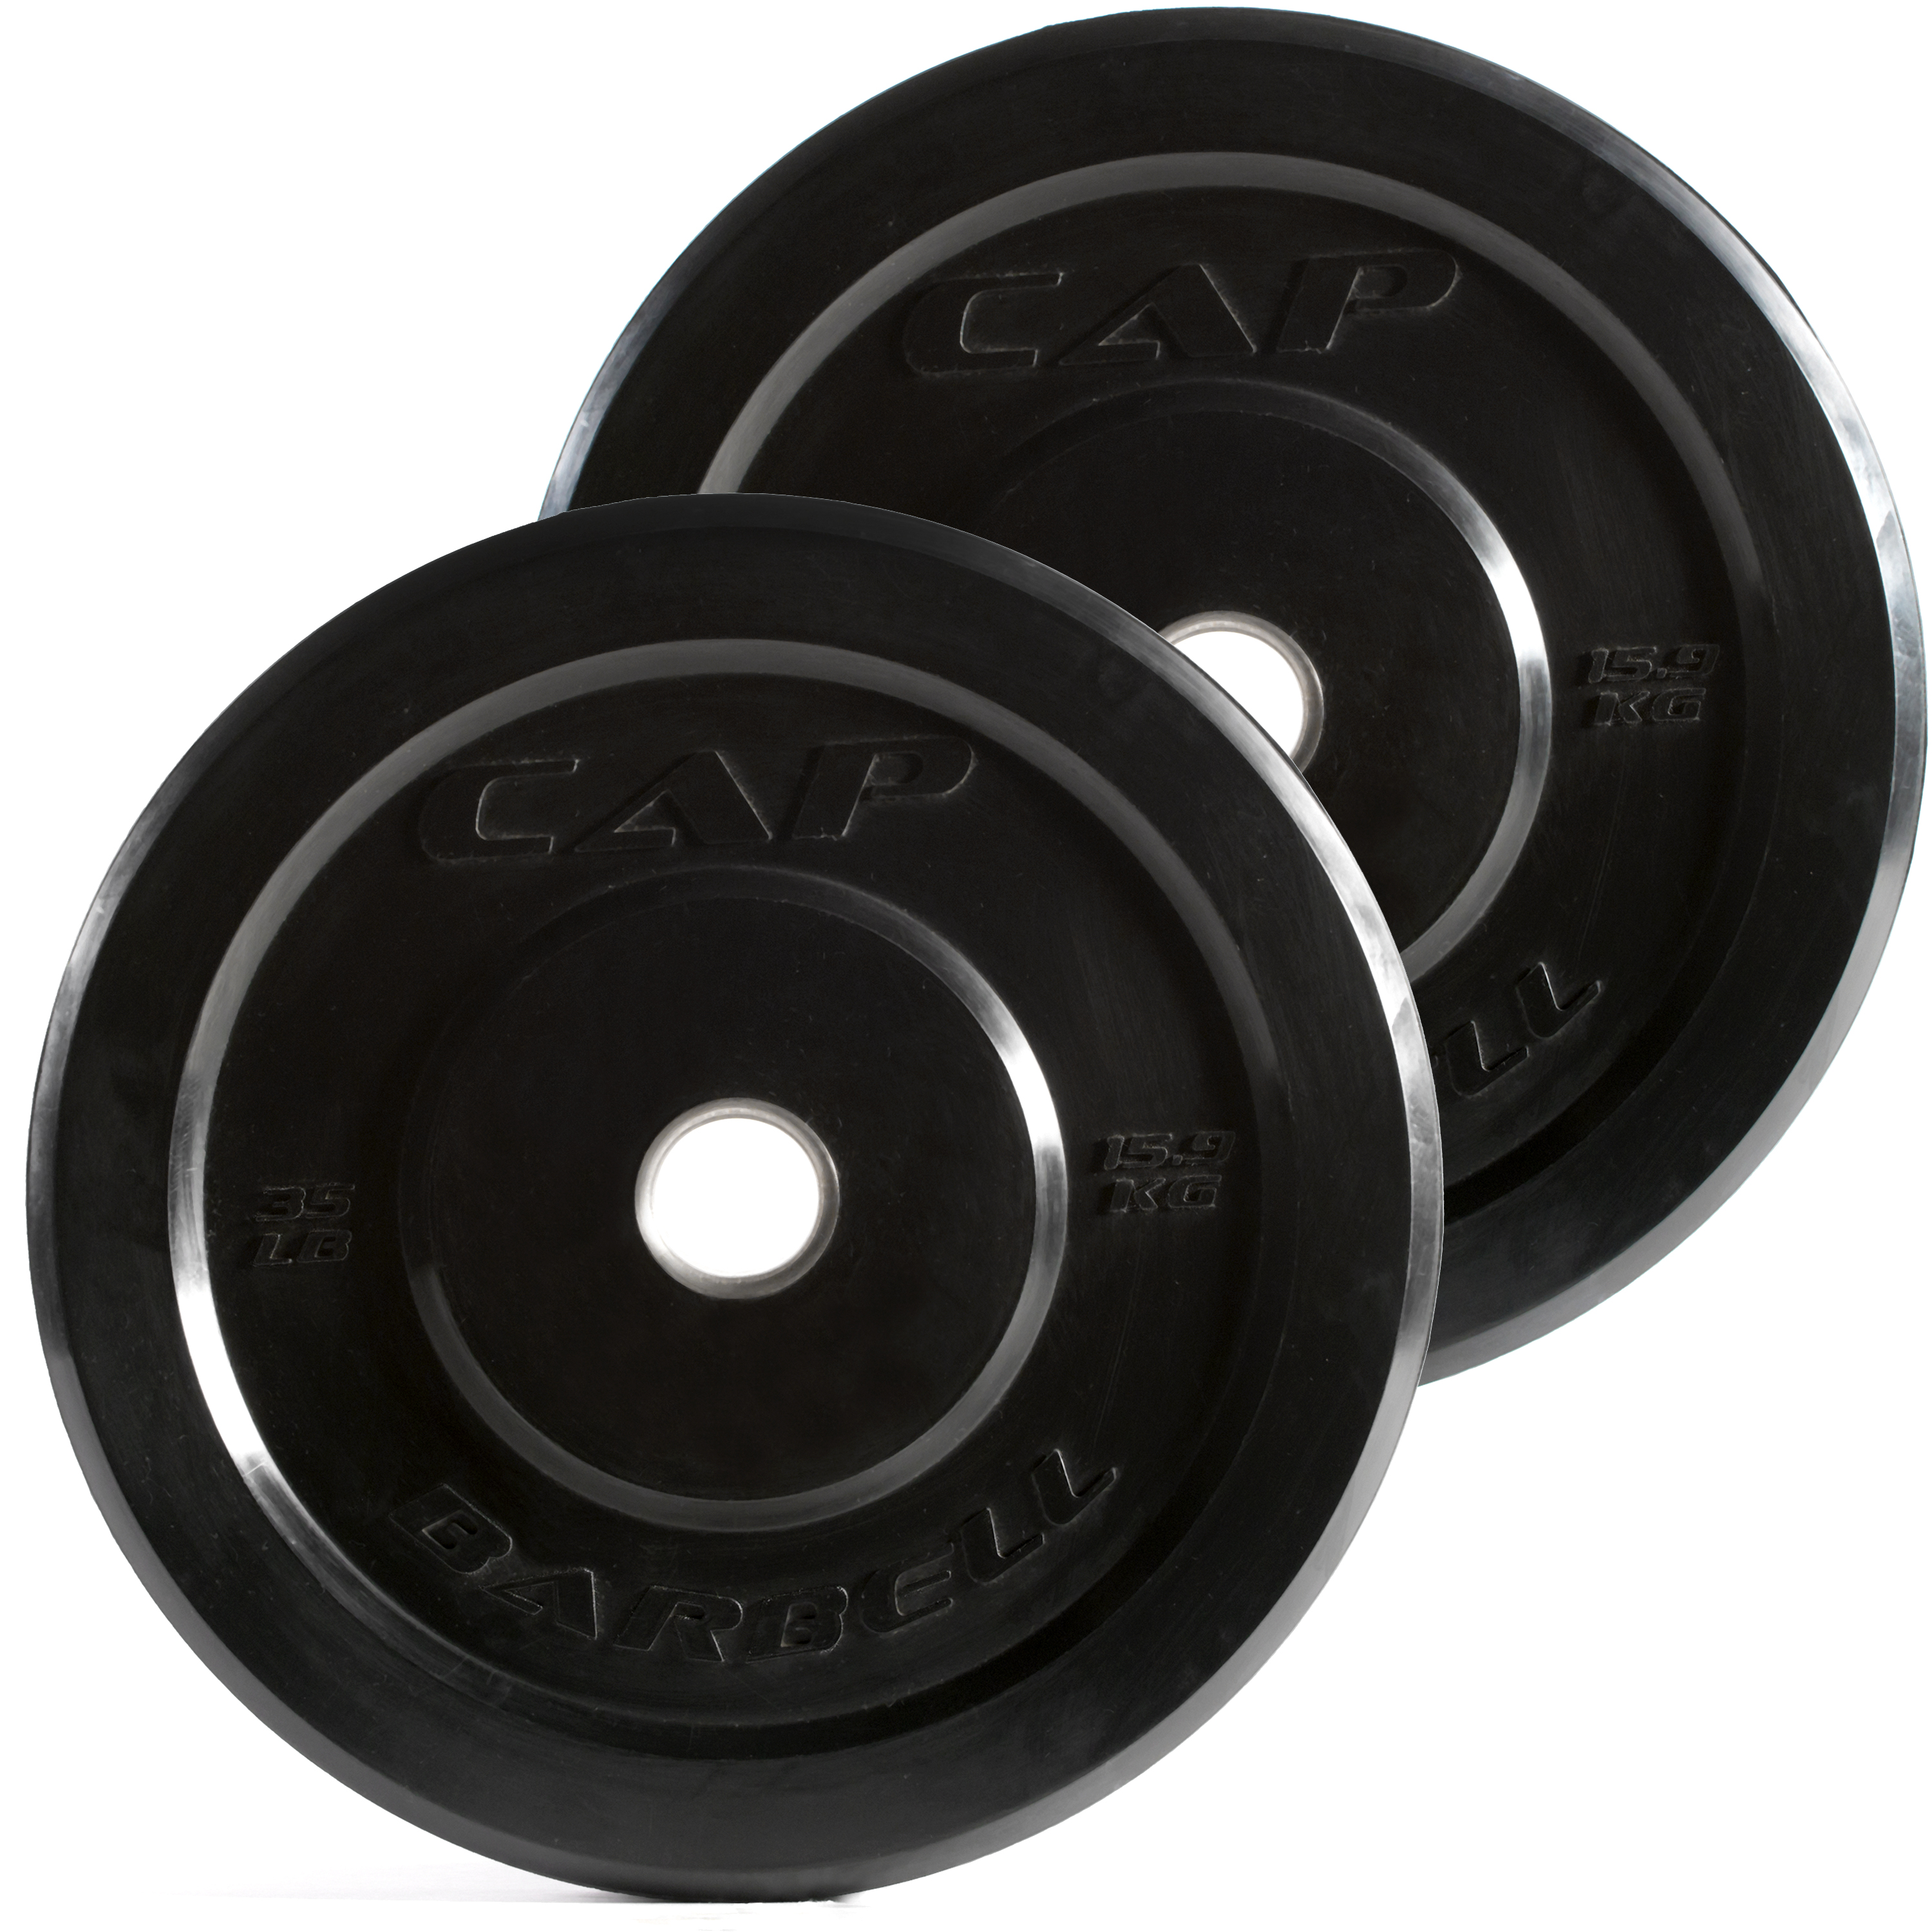 CAP Barbell - Olympic Bumper Plate Set, 70 lbs (ships in 2 boxes) - image 1 of 2